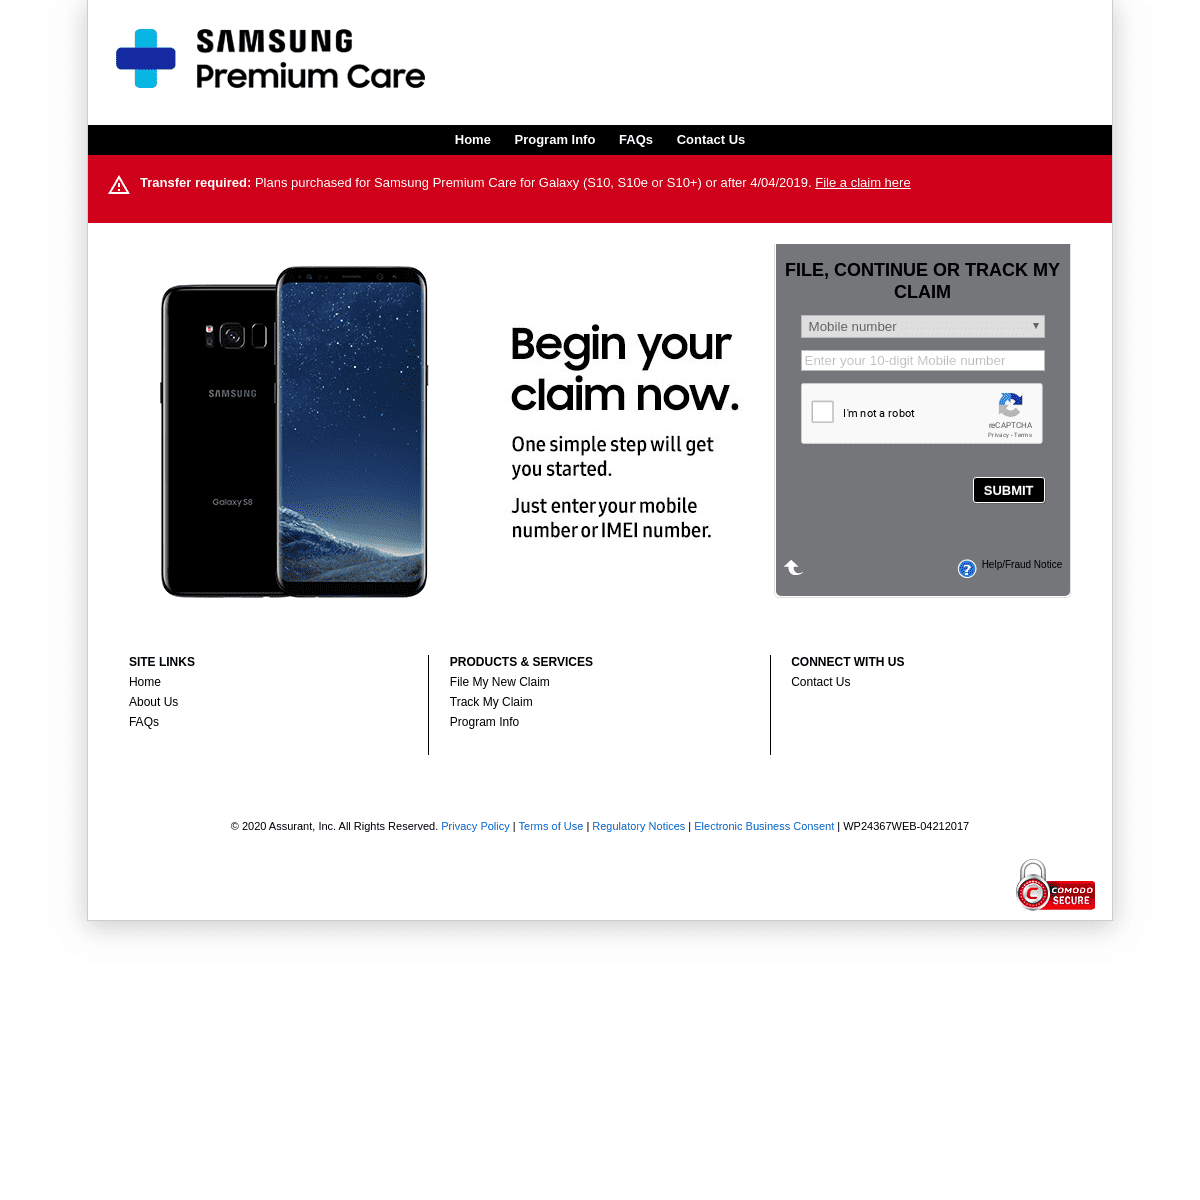 A complete backup of premiumcareclaims.com